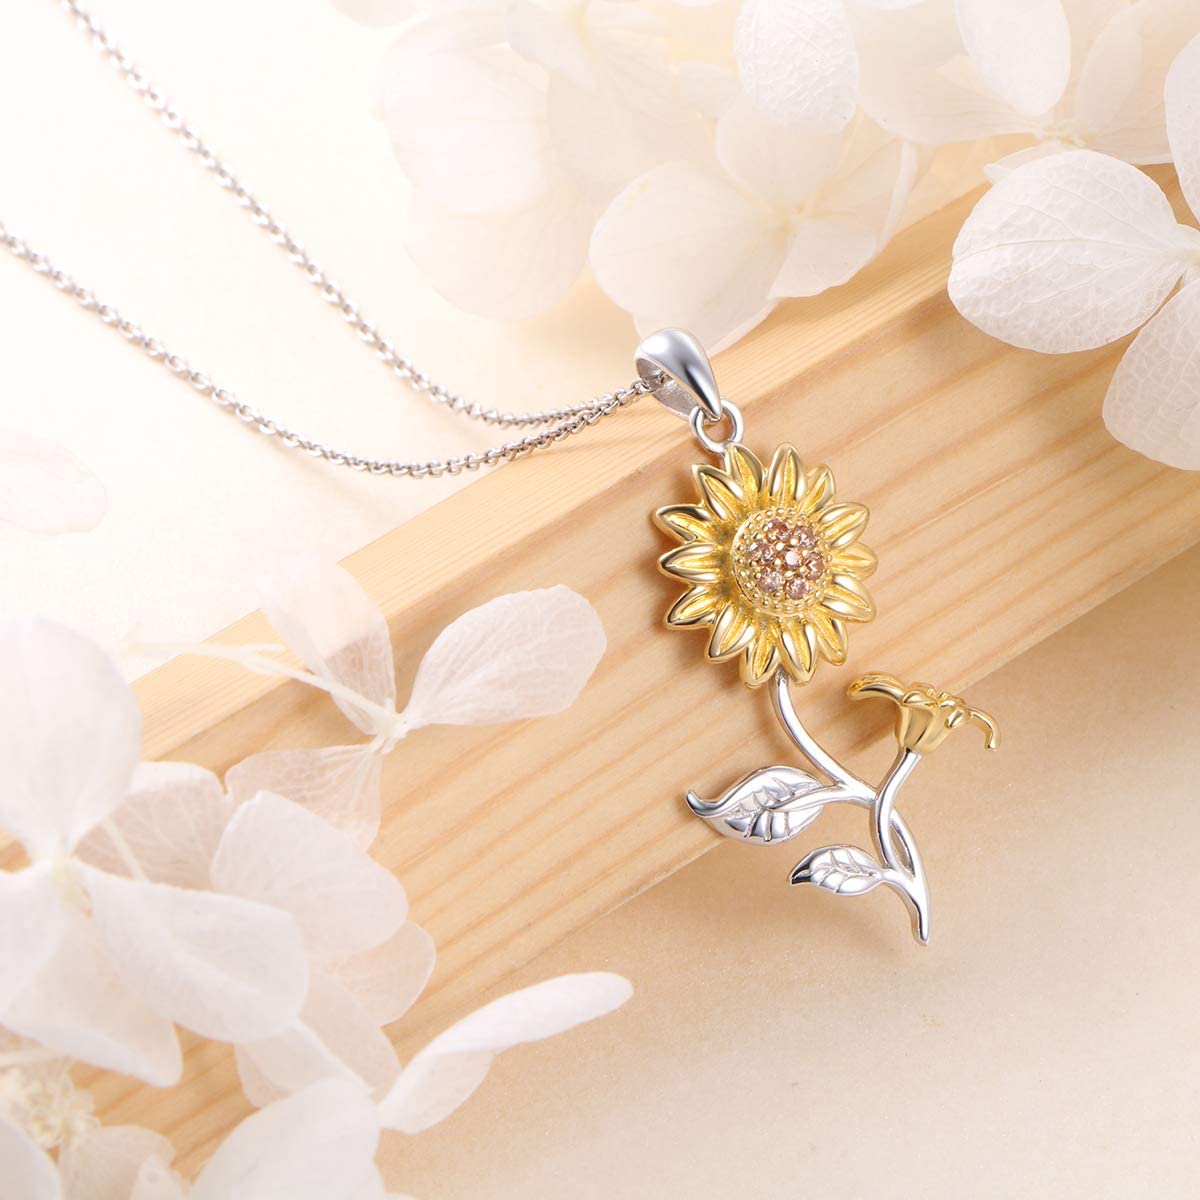 Rose Valley Sunflower Pendant Necklace for Women Flower Pendants Fashion Jewelry Girls Gifts YN017 - Charlie Dolly